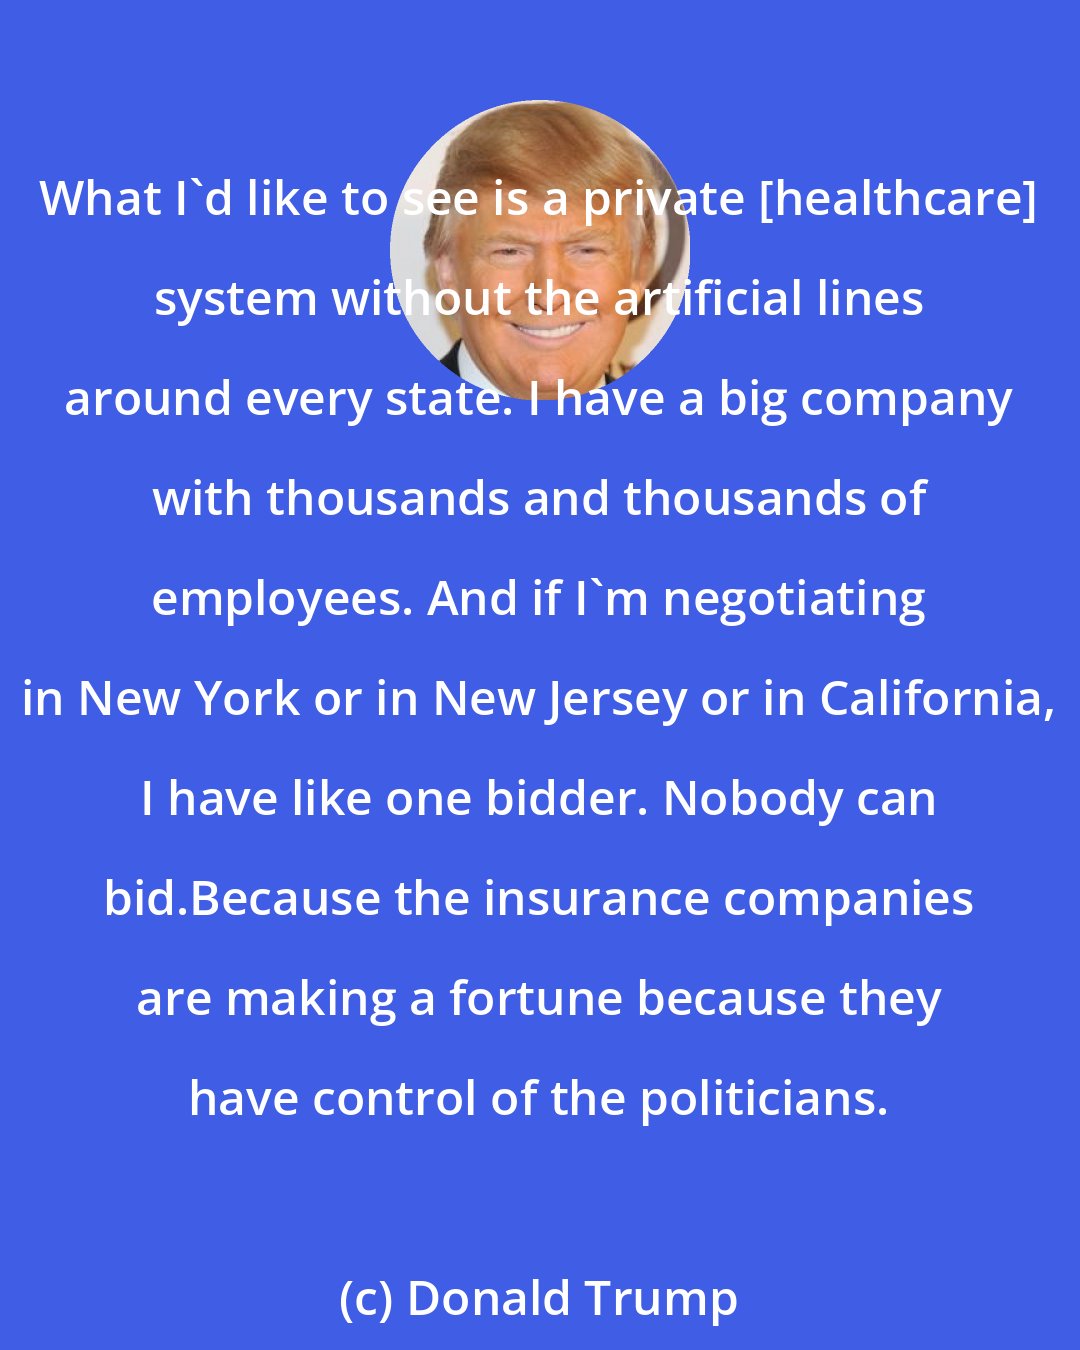 Donald Trump: What I'd like to see is a private [healthcare] system without the artificial lines around every state. I have a big company with thousands and thousands of employees. And if I'm negotiating in New York or in New Jersey or in California, I have like one bidder. Nobody can bid.Because the insurance companies are making a fortune because they have control of the politicians.